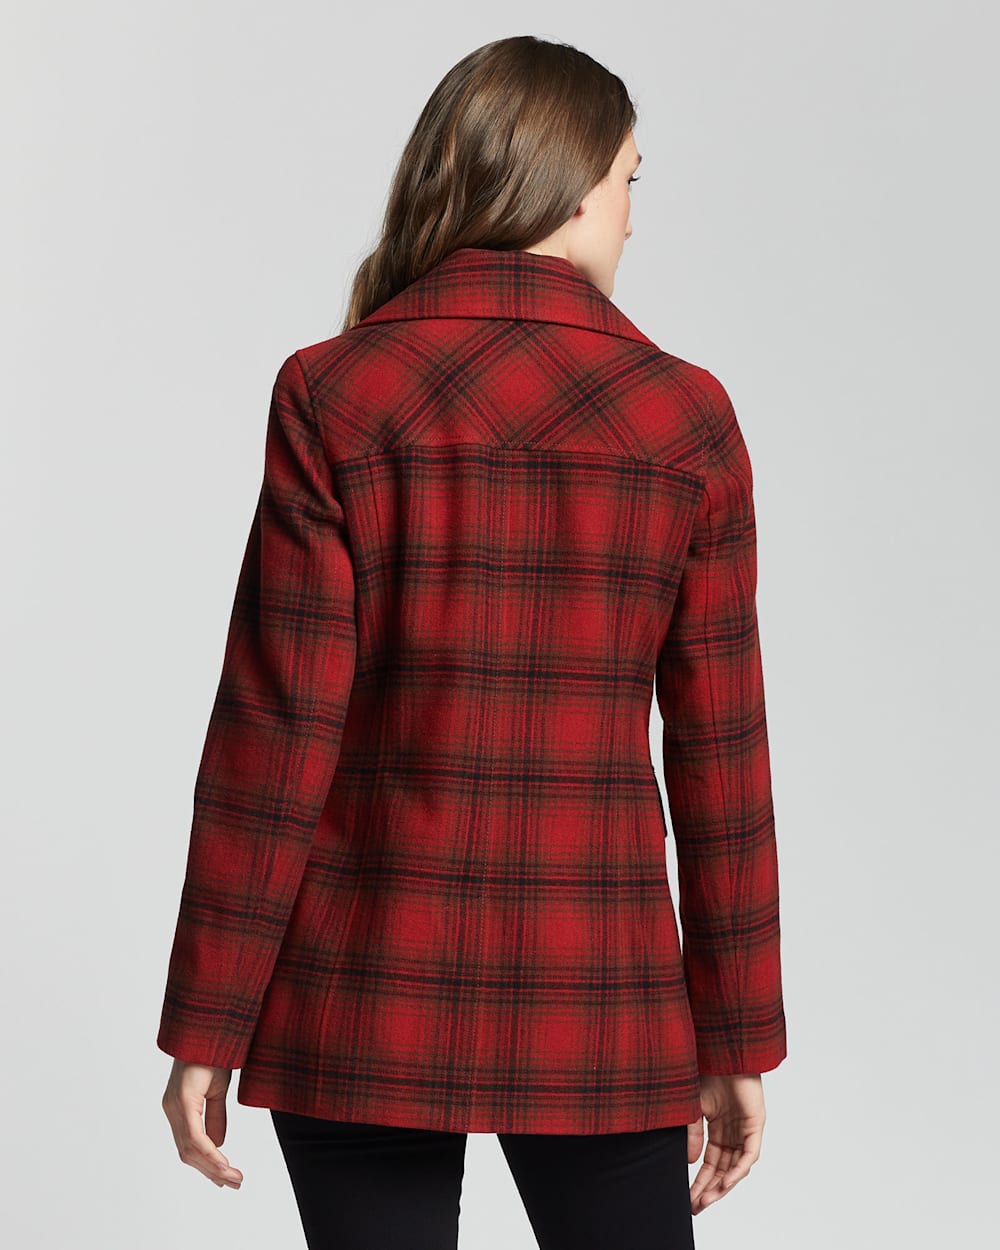 ALTERNATE VIEW OF WOMEN'S PLAID WOOL PEACOAT IN RED/CHARCOAL/DEEP OLIVE image number 3